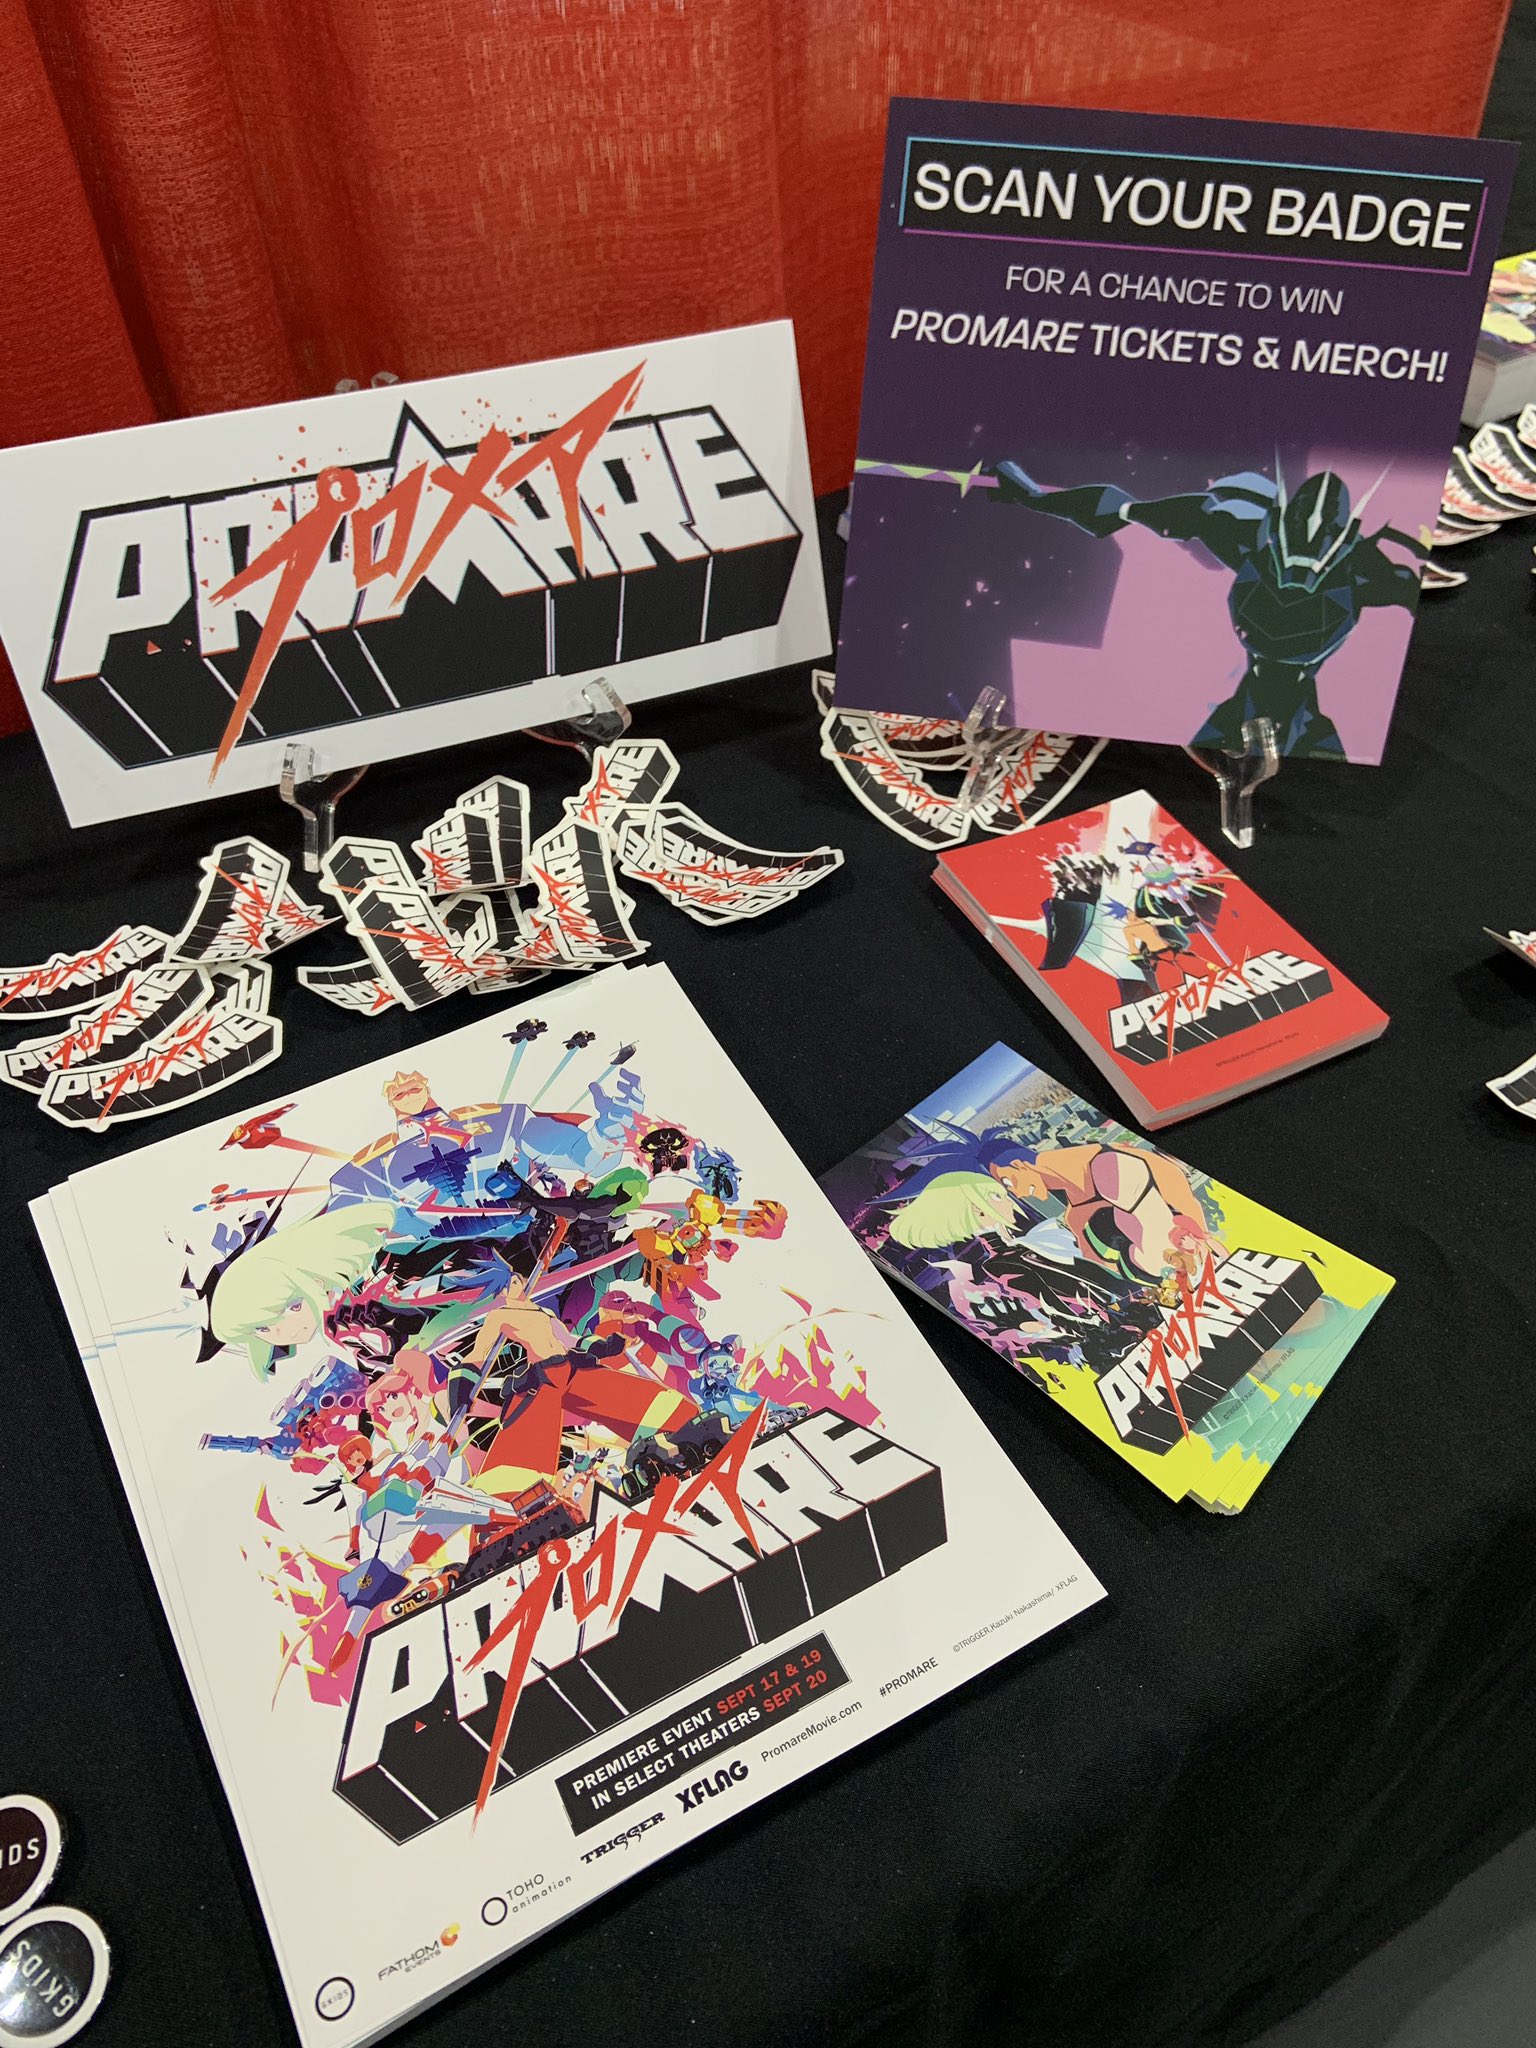 Gkids Films Check Out The Promare Booth 3326 At Animeexpo Snap A Pic With Lio Galo Grab Promare Freebies Enter Our Giveaway For A Chance To Win Tickets